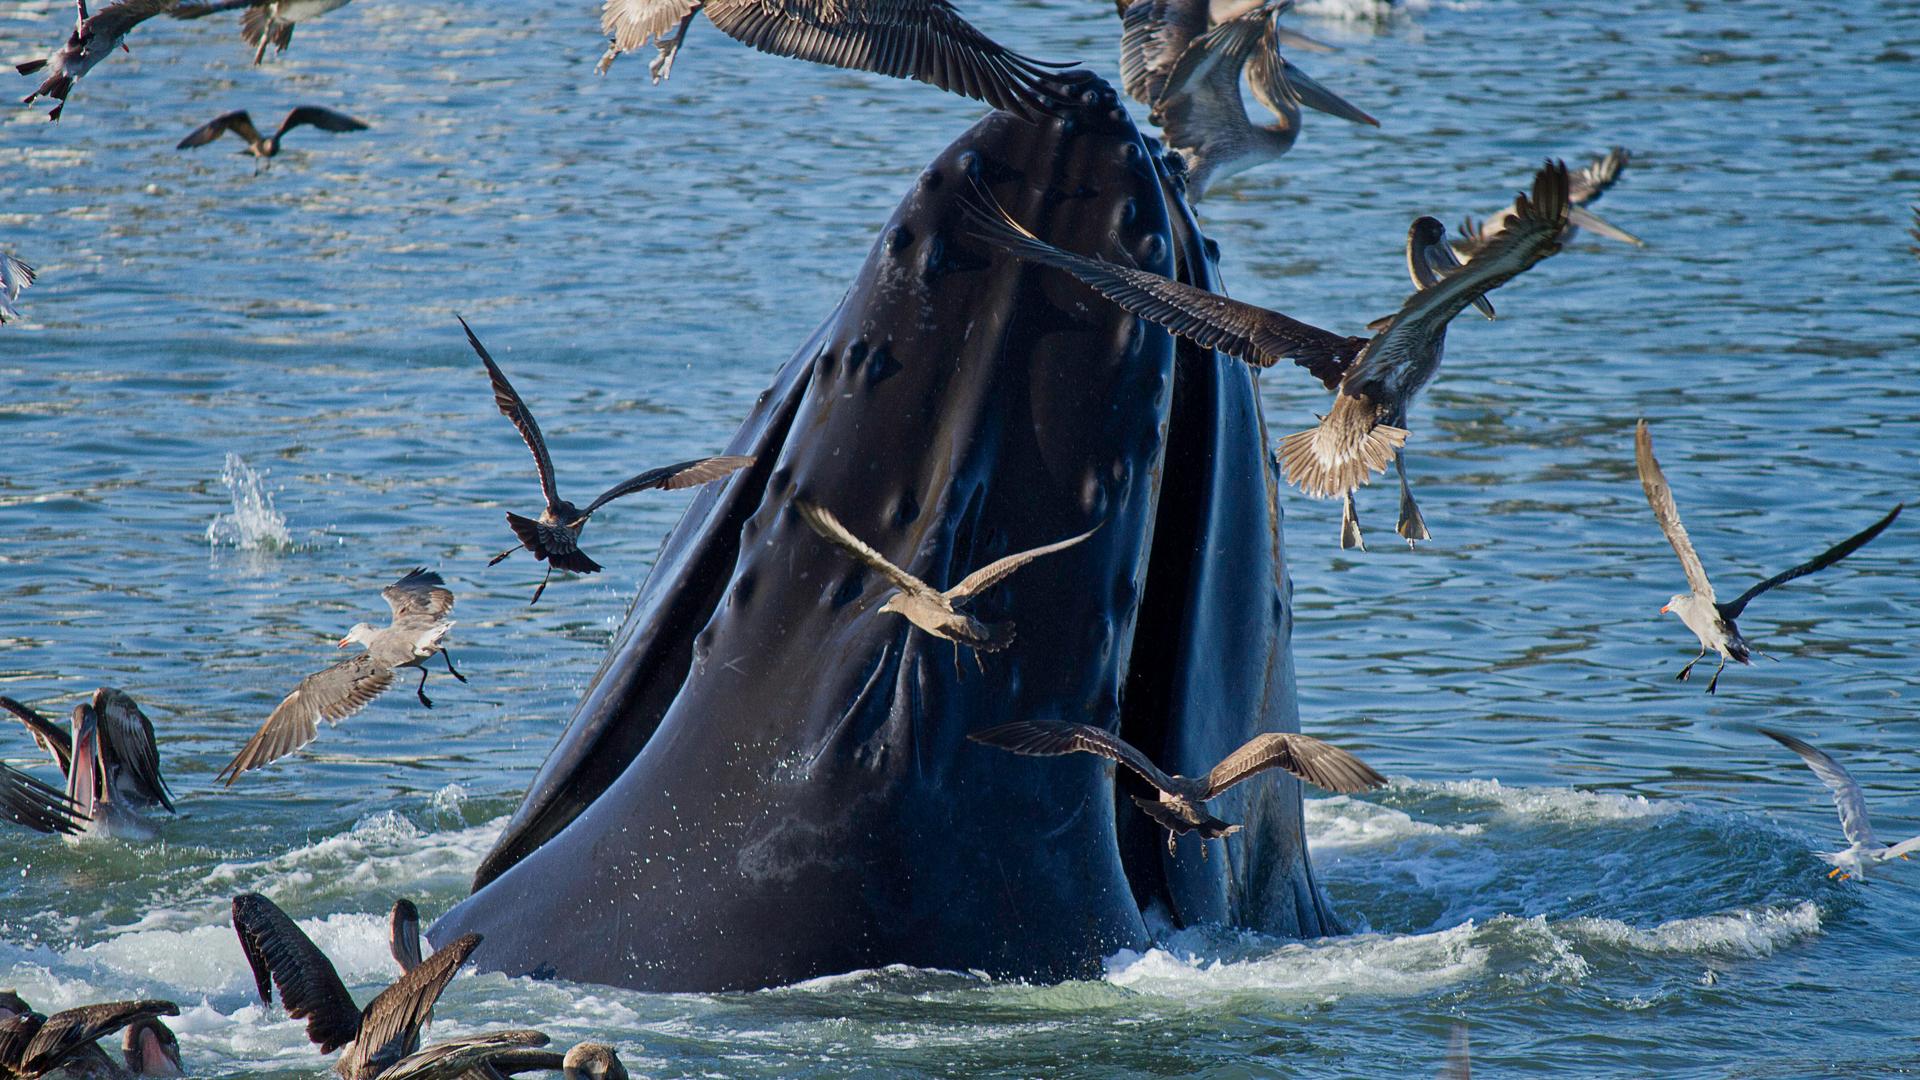 A humpback whale surfacing from the water surrounded by seagulls